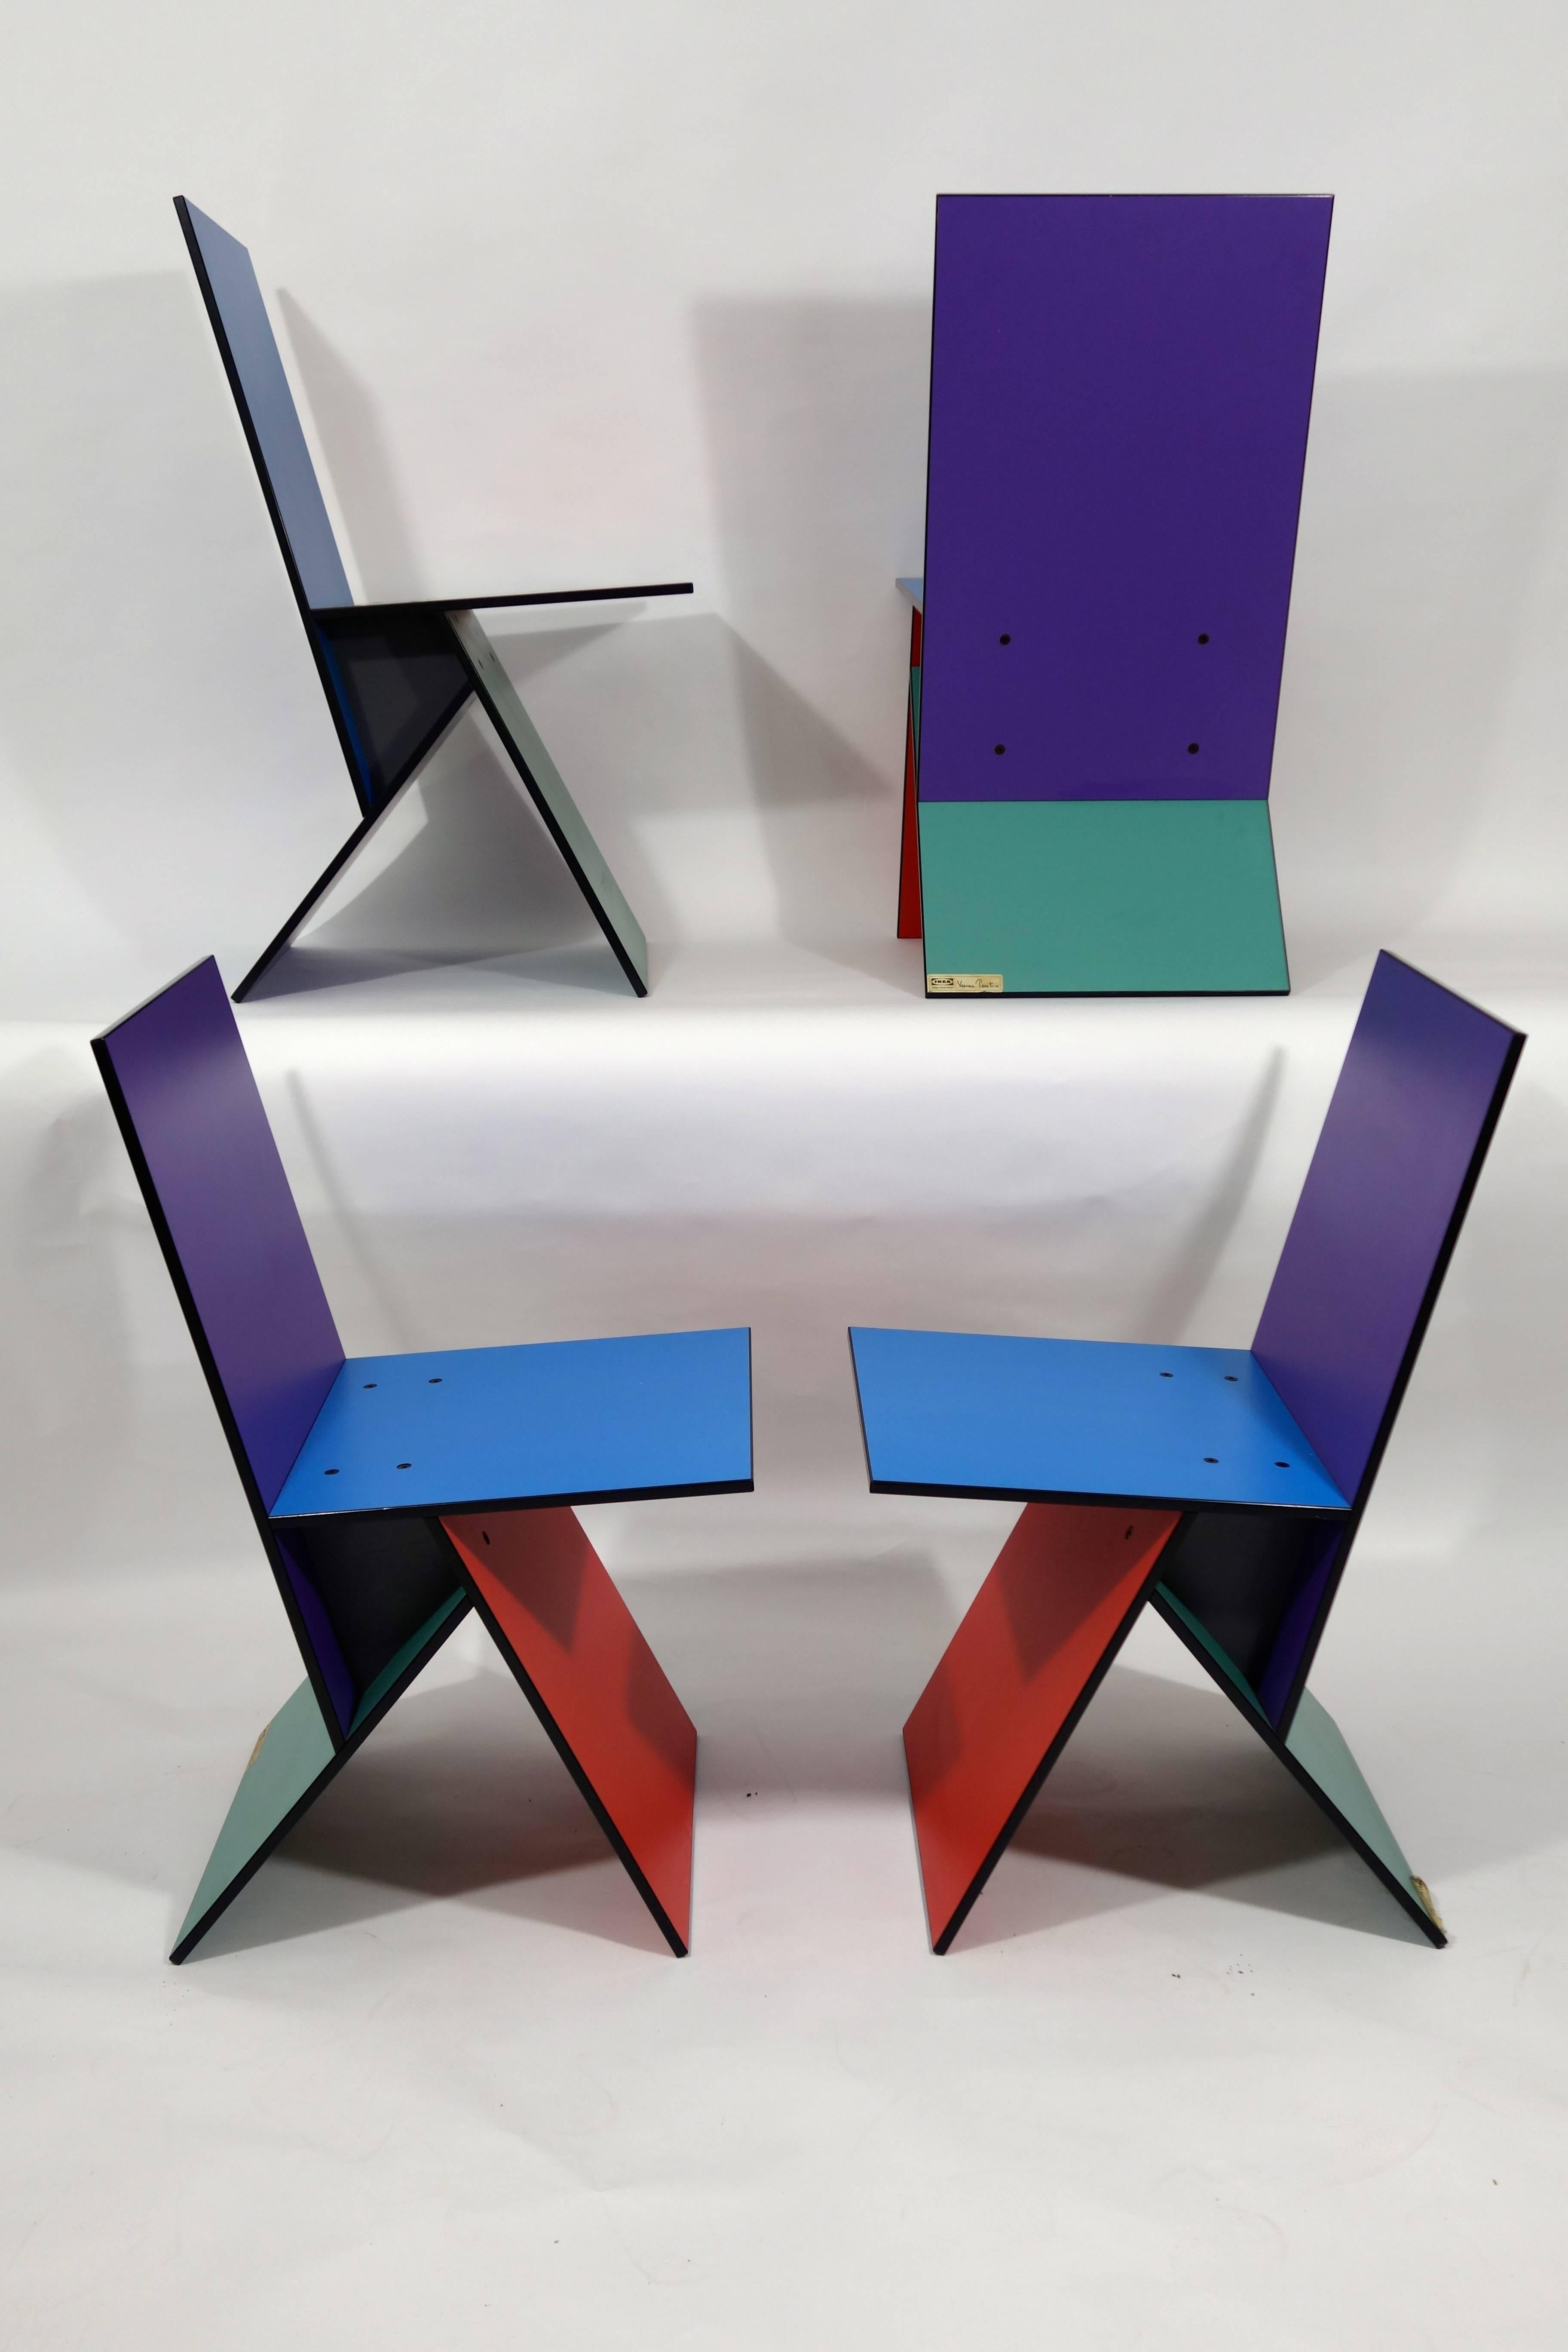 Set of four rare Vilbert Chairs designed in 1993 by Verner Panton for Ikea. Only about 4,000 of these chairs were manufactured.

The chairs consist of four multi-colored MDF boards screwed together.

Vilbert came in two color schemes: Three of